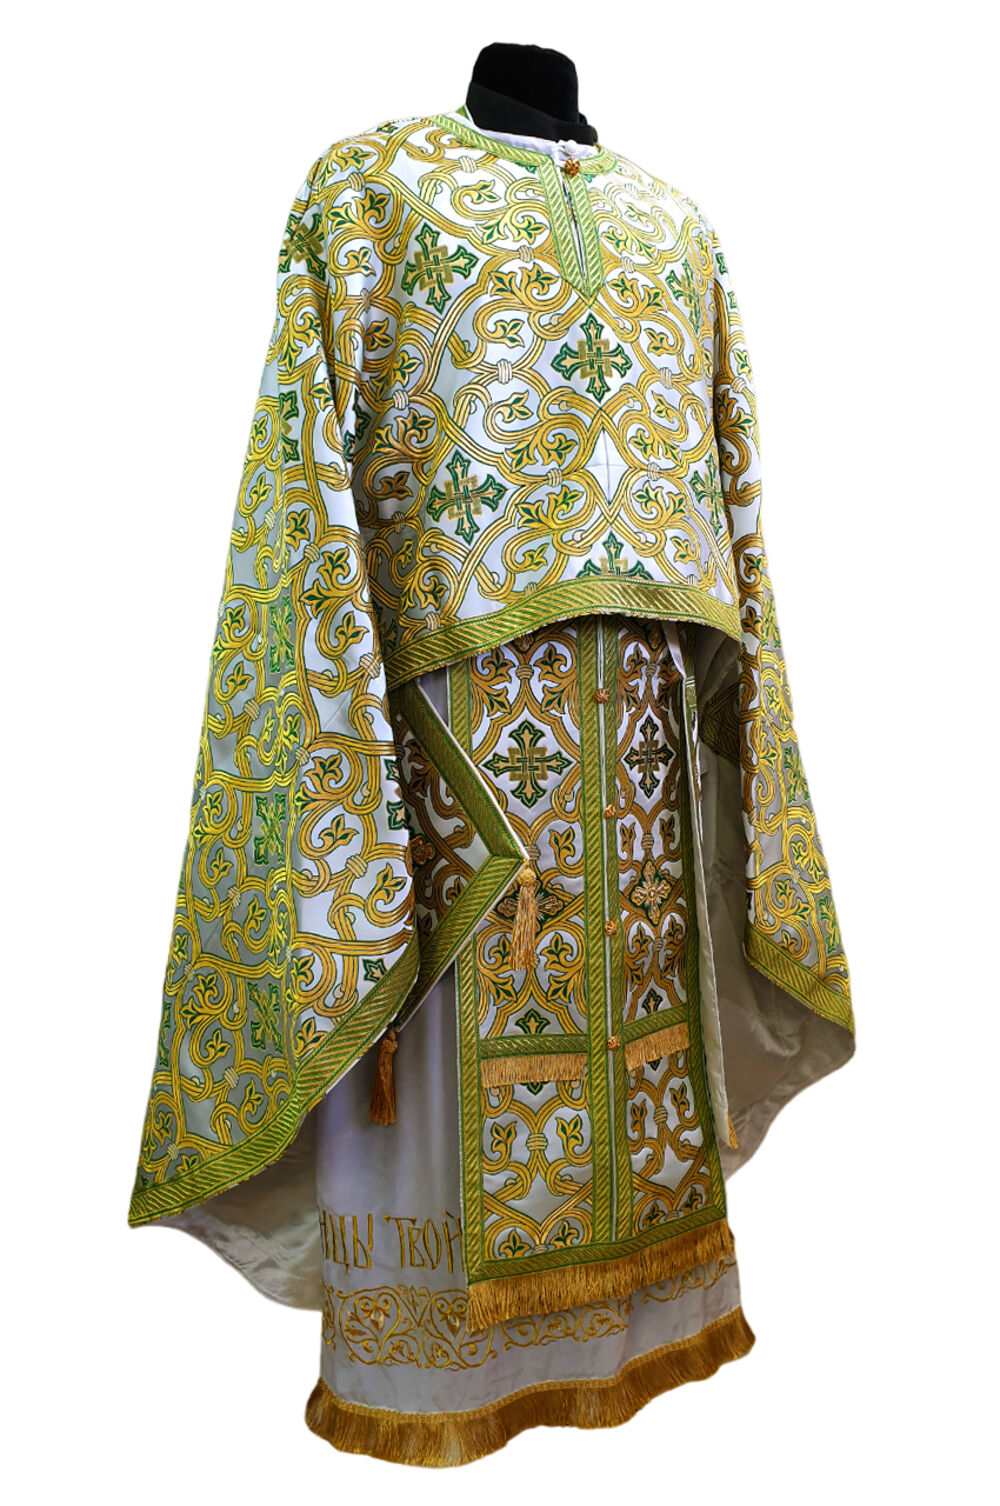 Vestments of a Greek priest with a liturgical set